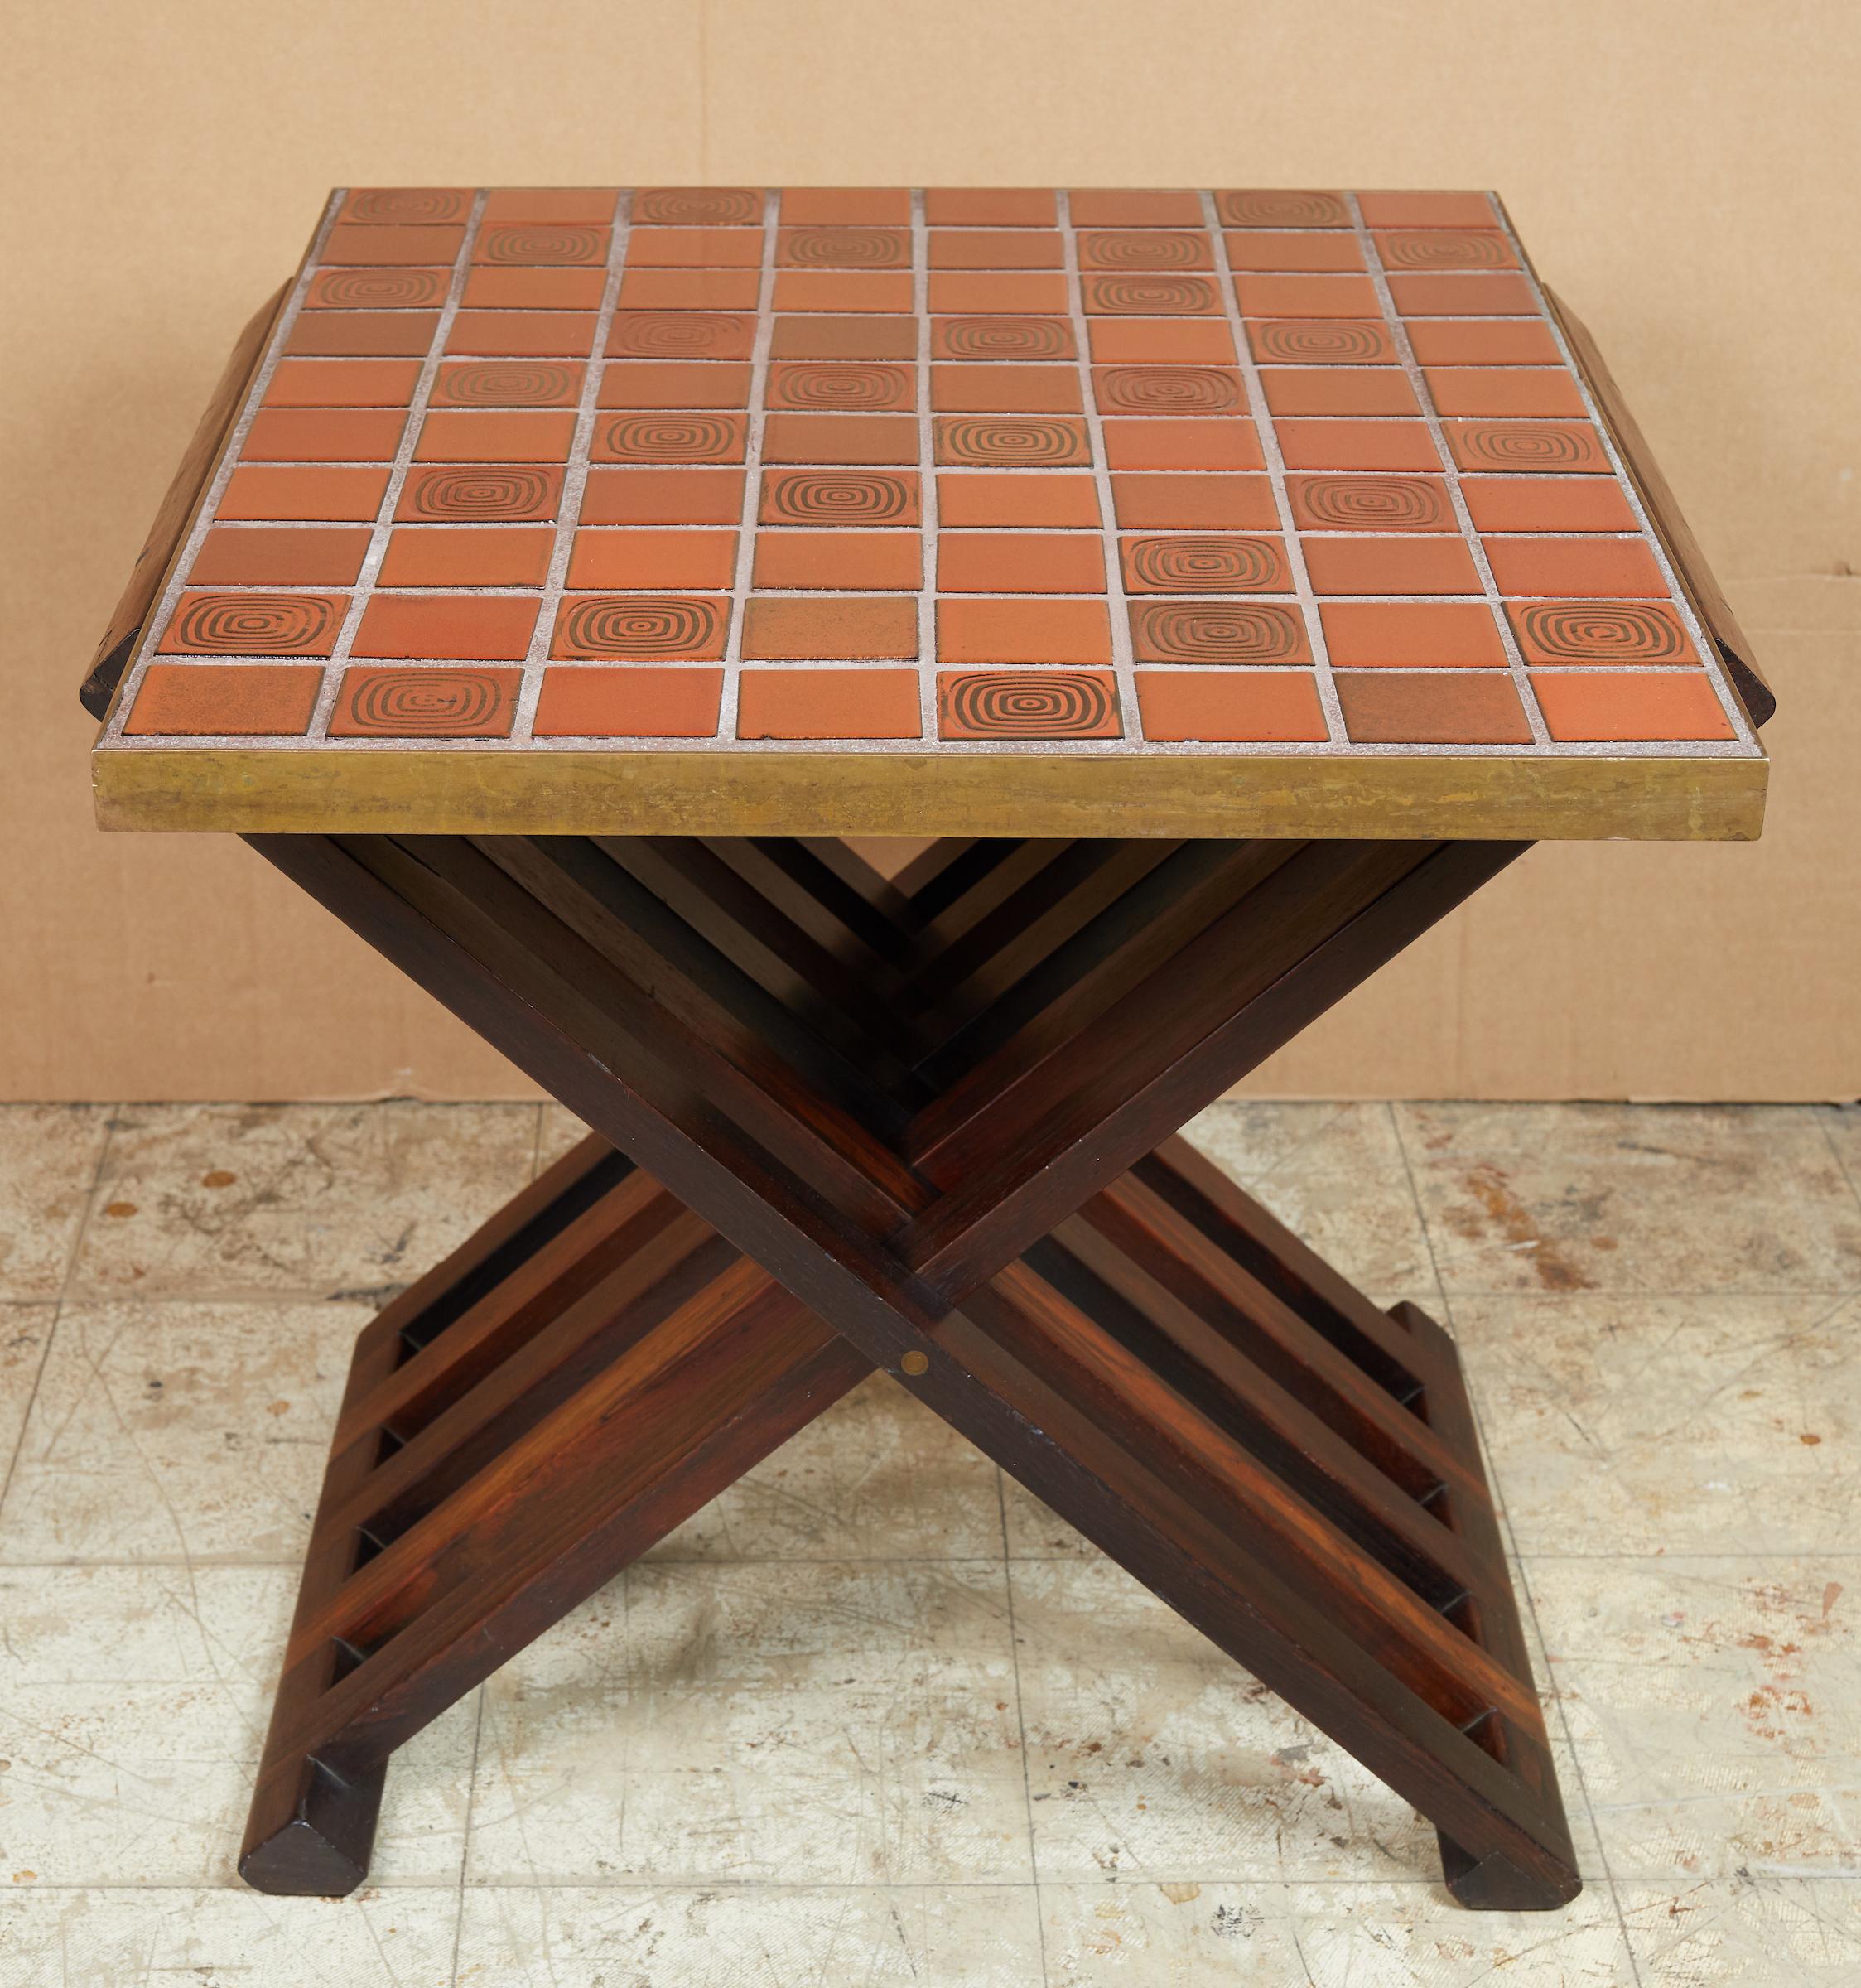 American Rare Wood X-Form Folding Tile Top Table by Edward Wormley for Dunbar